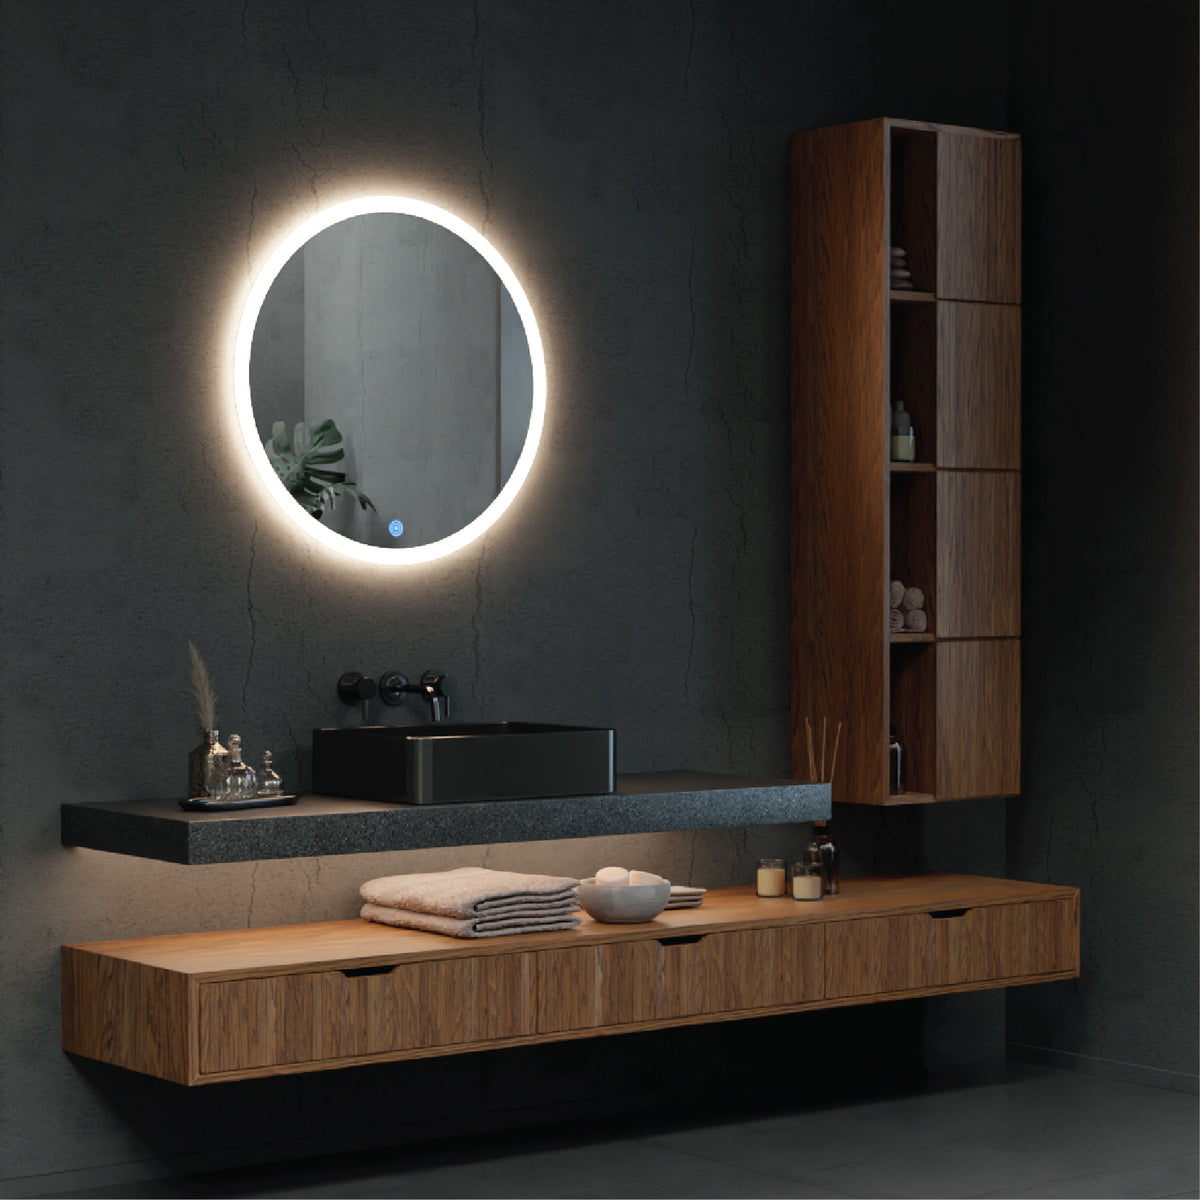 The Titan LED Mirror seamlessly integrates into your space, providing both elegance and functionality.